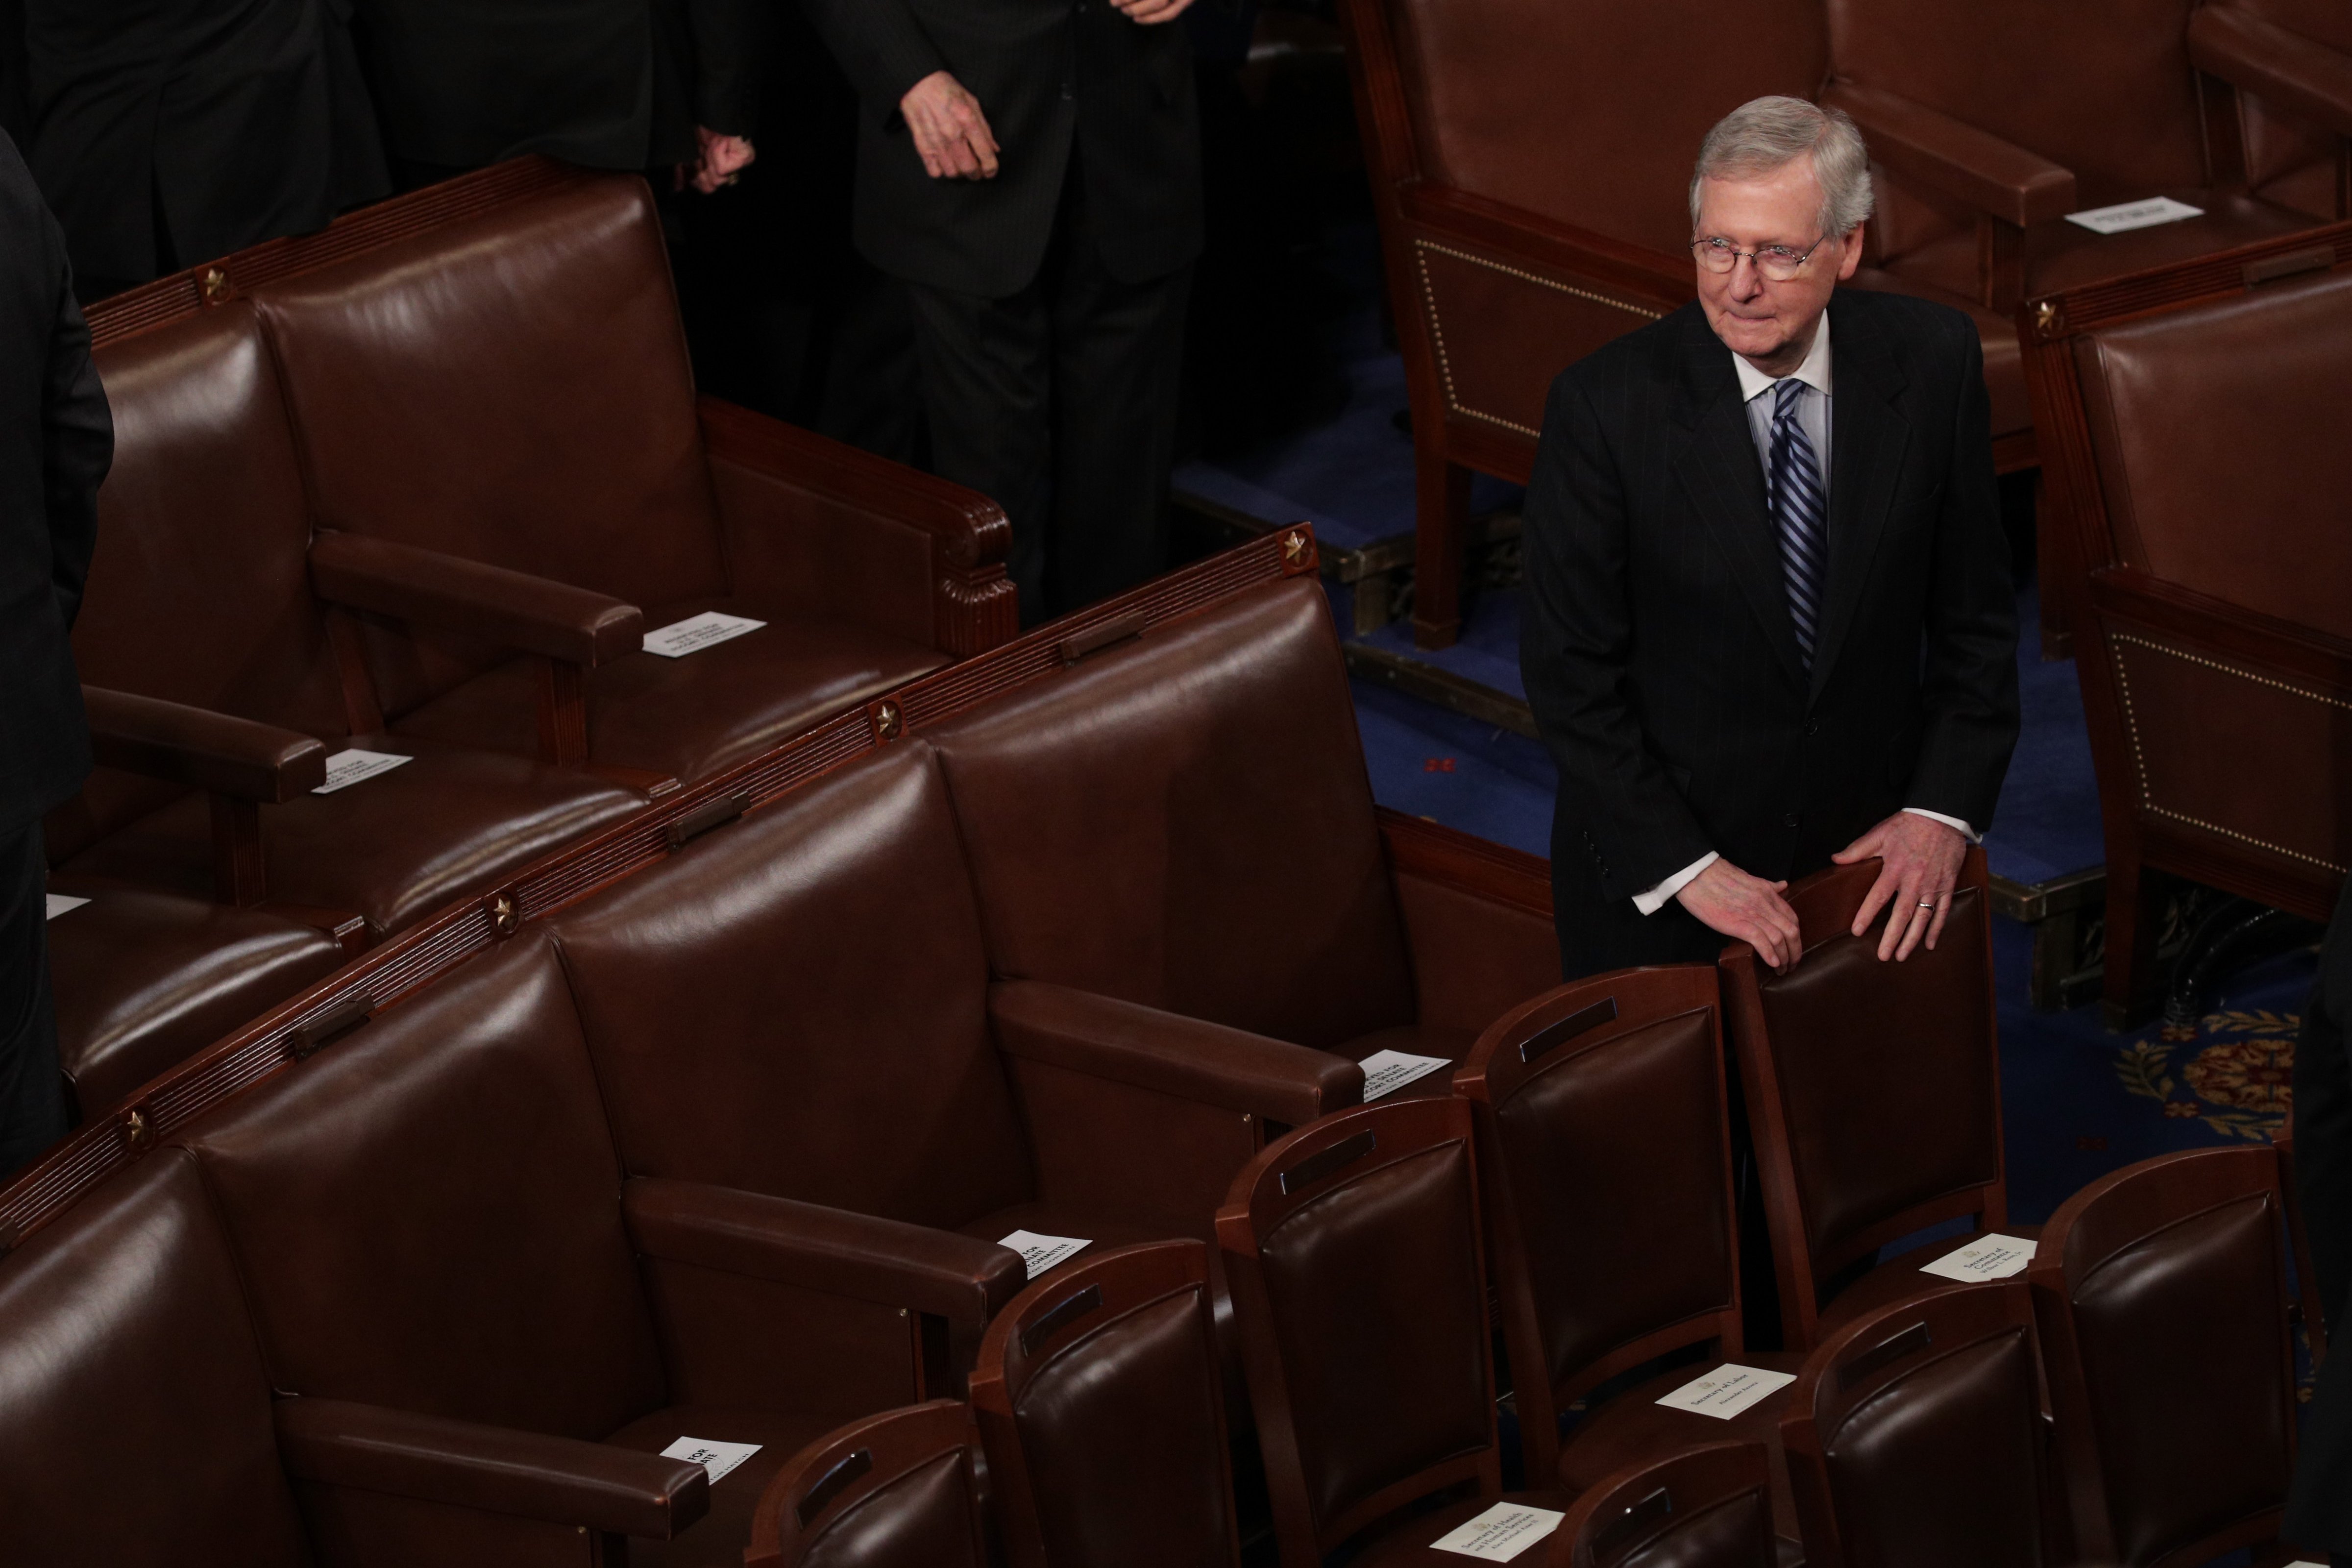 U.S. Senate Majority Leader Sen. Mitch McConnell (R-KY) waits for the start of the State of the Union address in the chamber of the U.S. House of Representatives January 30, 2018 in Washington, DC. This is the first State of the Union address given by U.S. President Donald Trump and his second joint-session address to Congress.